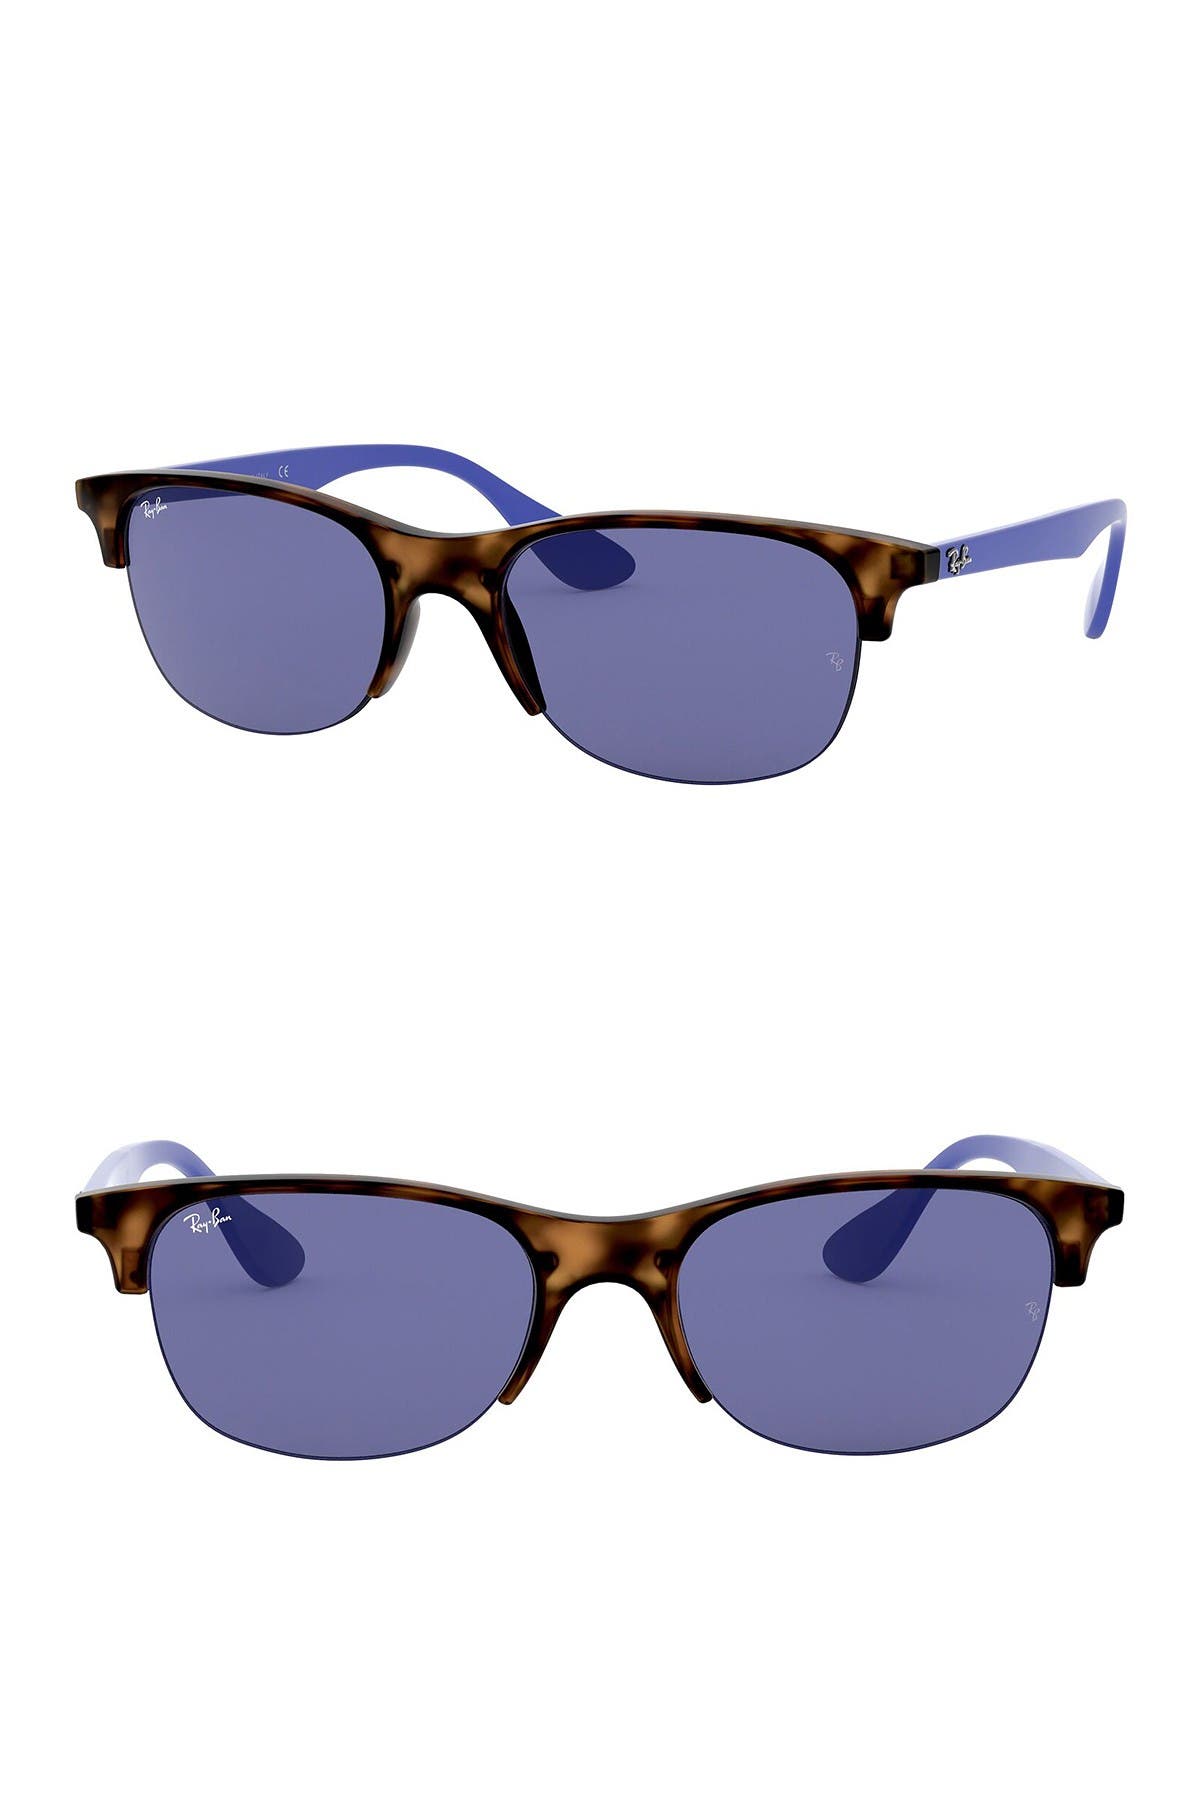 nordstrom rack ray ban sale